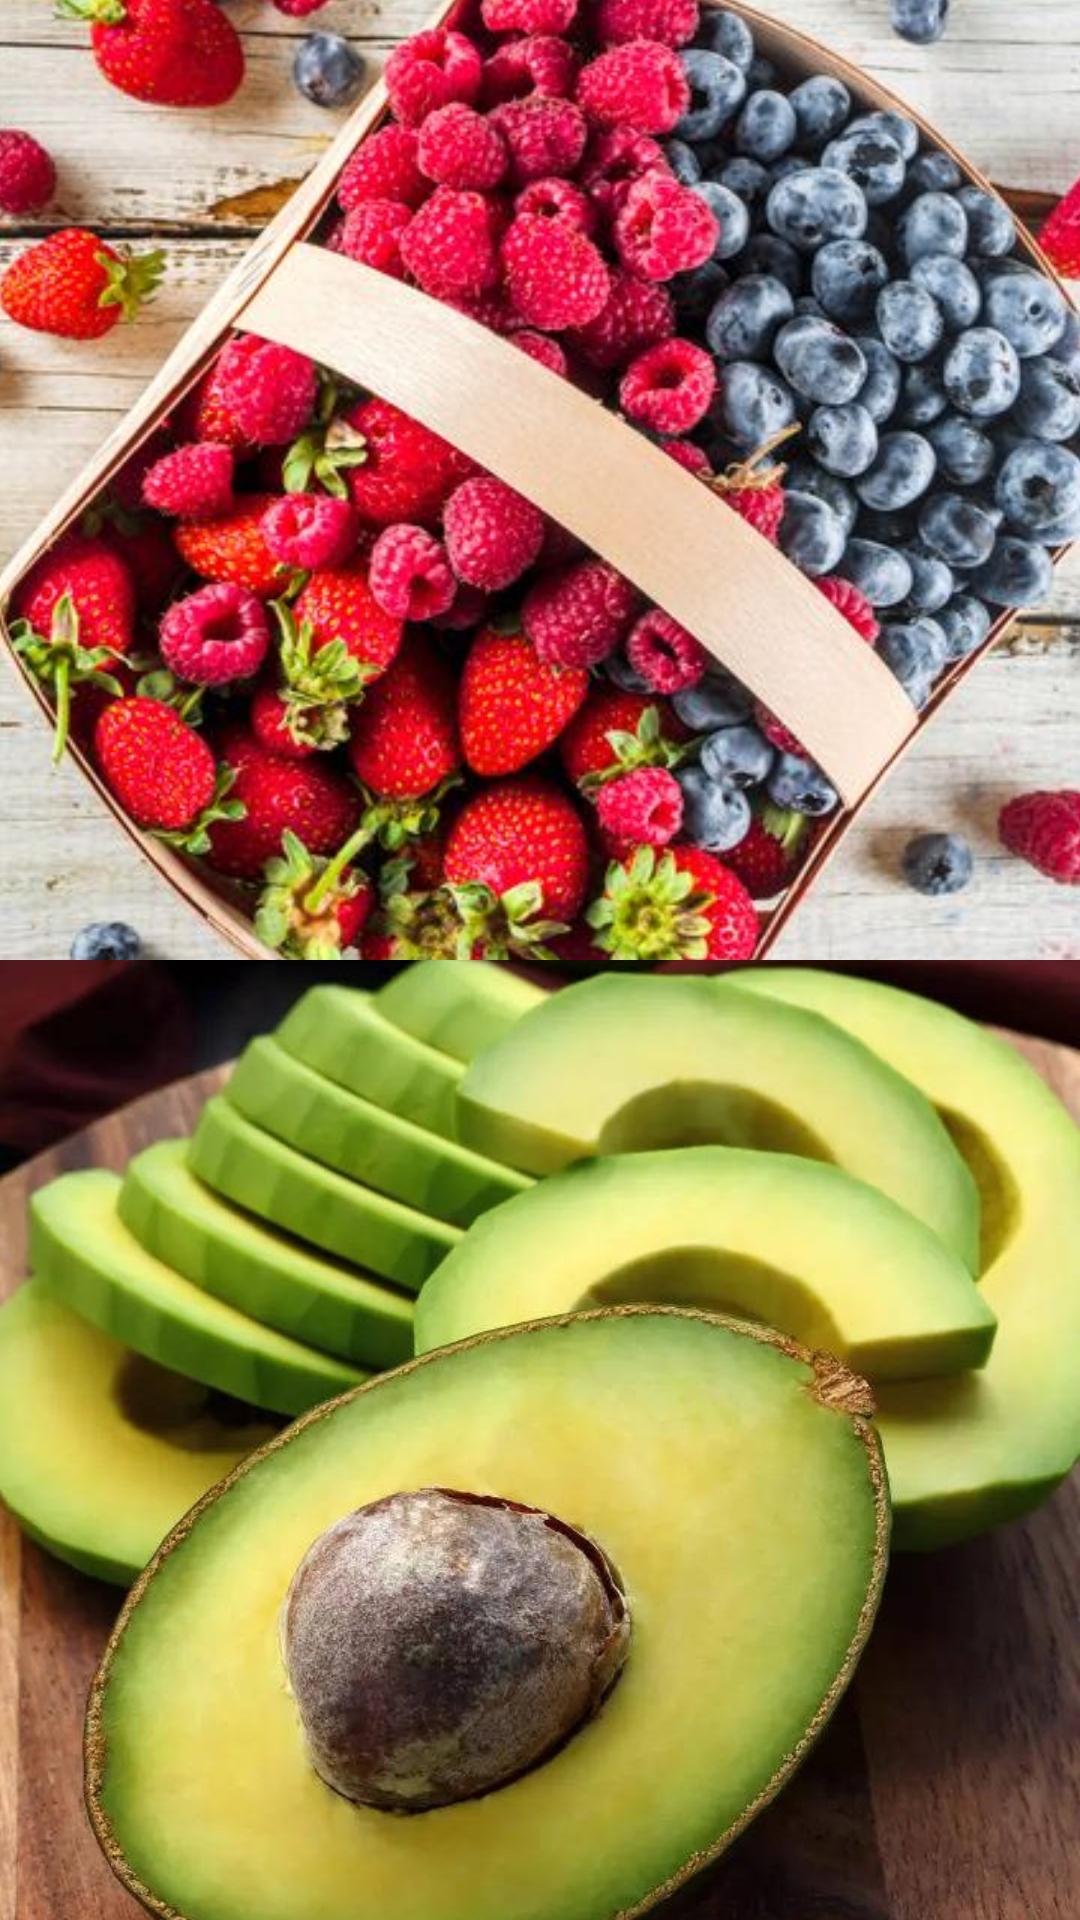 5 fruits every mom-to-be should eat